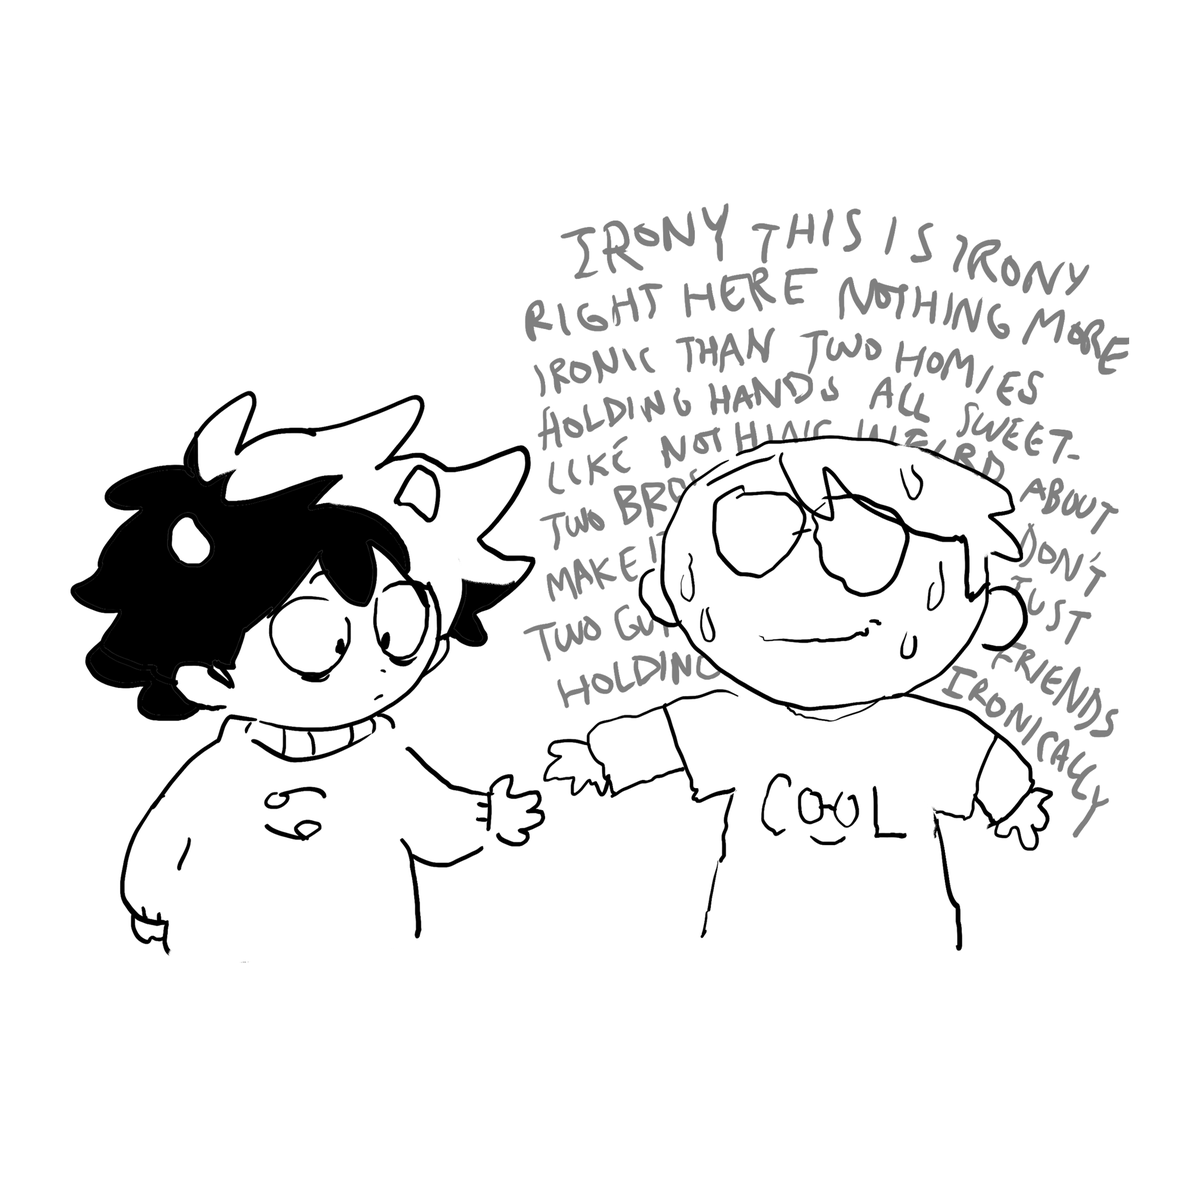 regularly scheduled time to think about homestuck and davekat 